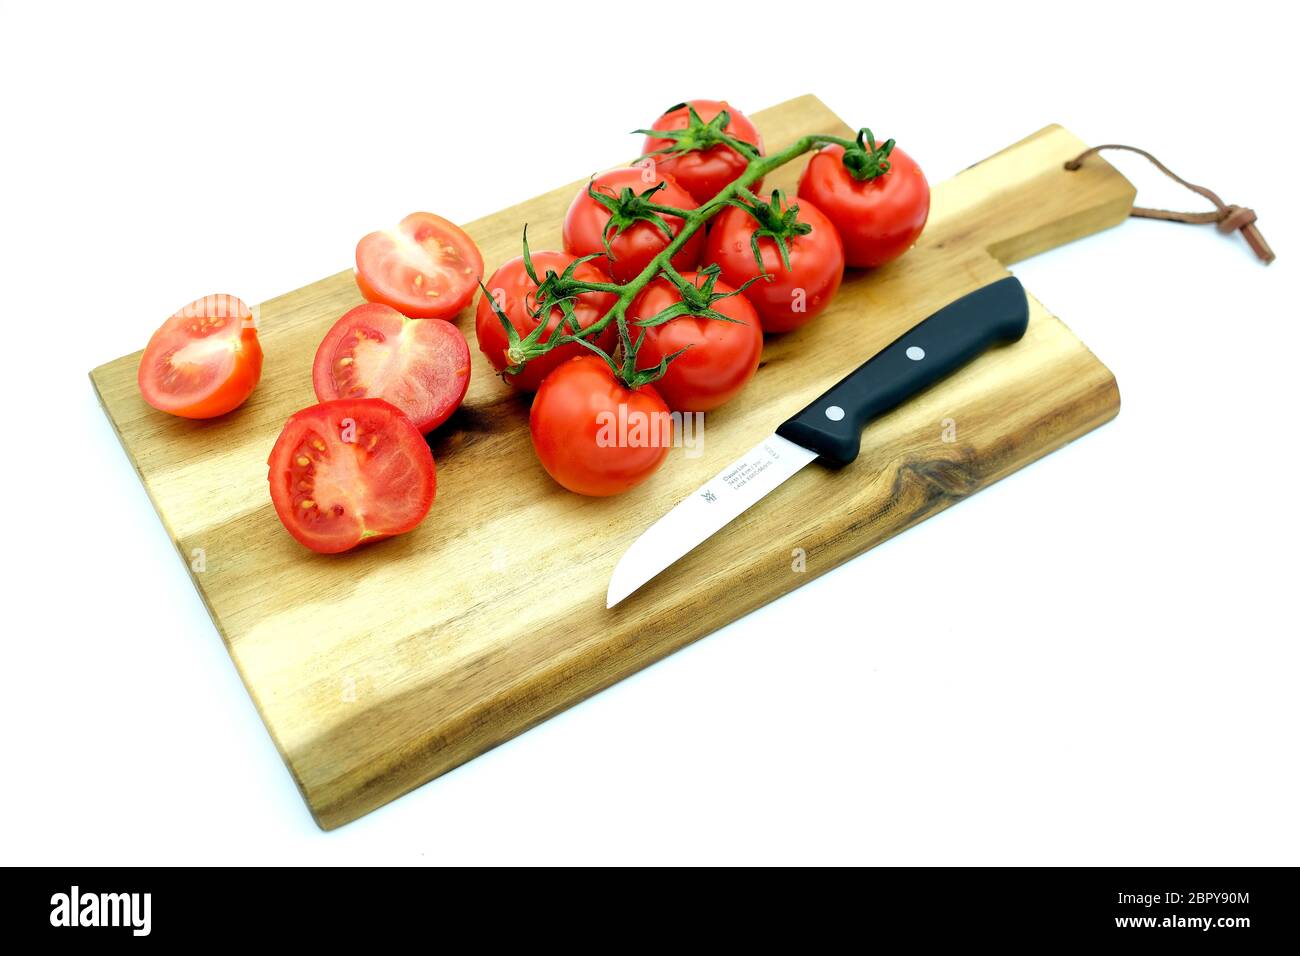 Wooden Board with Tomatoes and a Knife Stock Photo